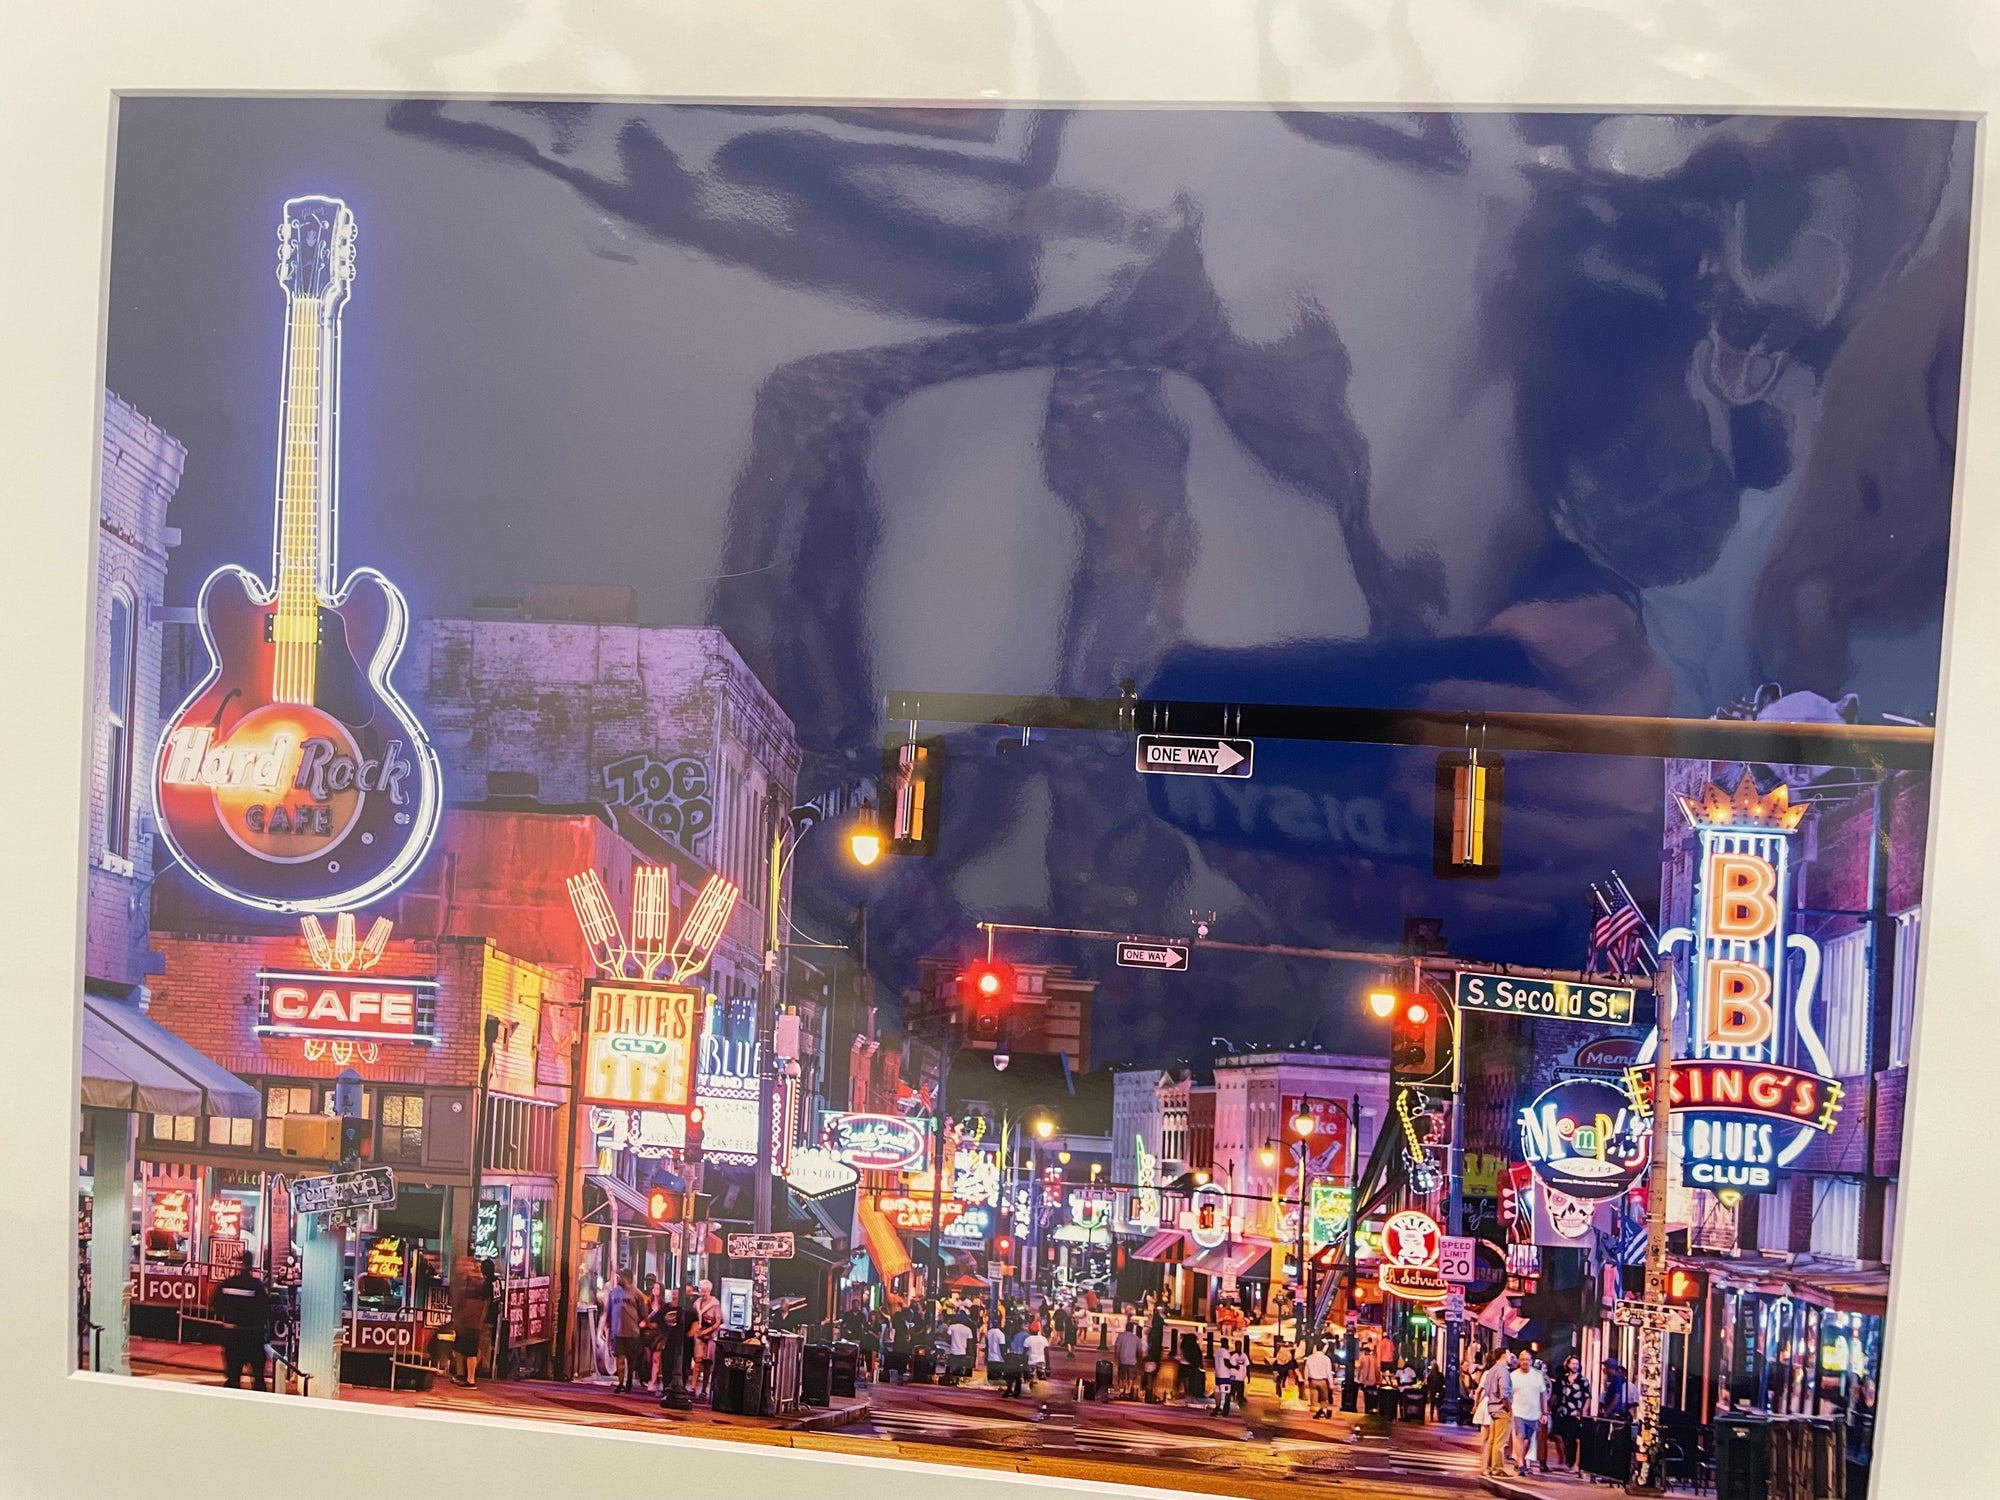 157 Beale Street PHOTOGRAPH by Mike Baber